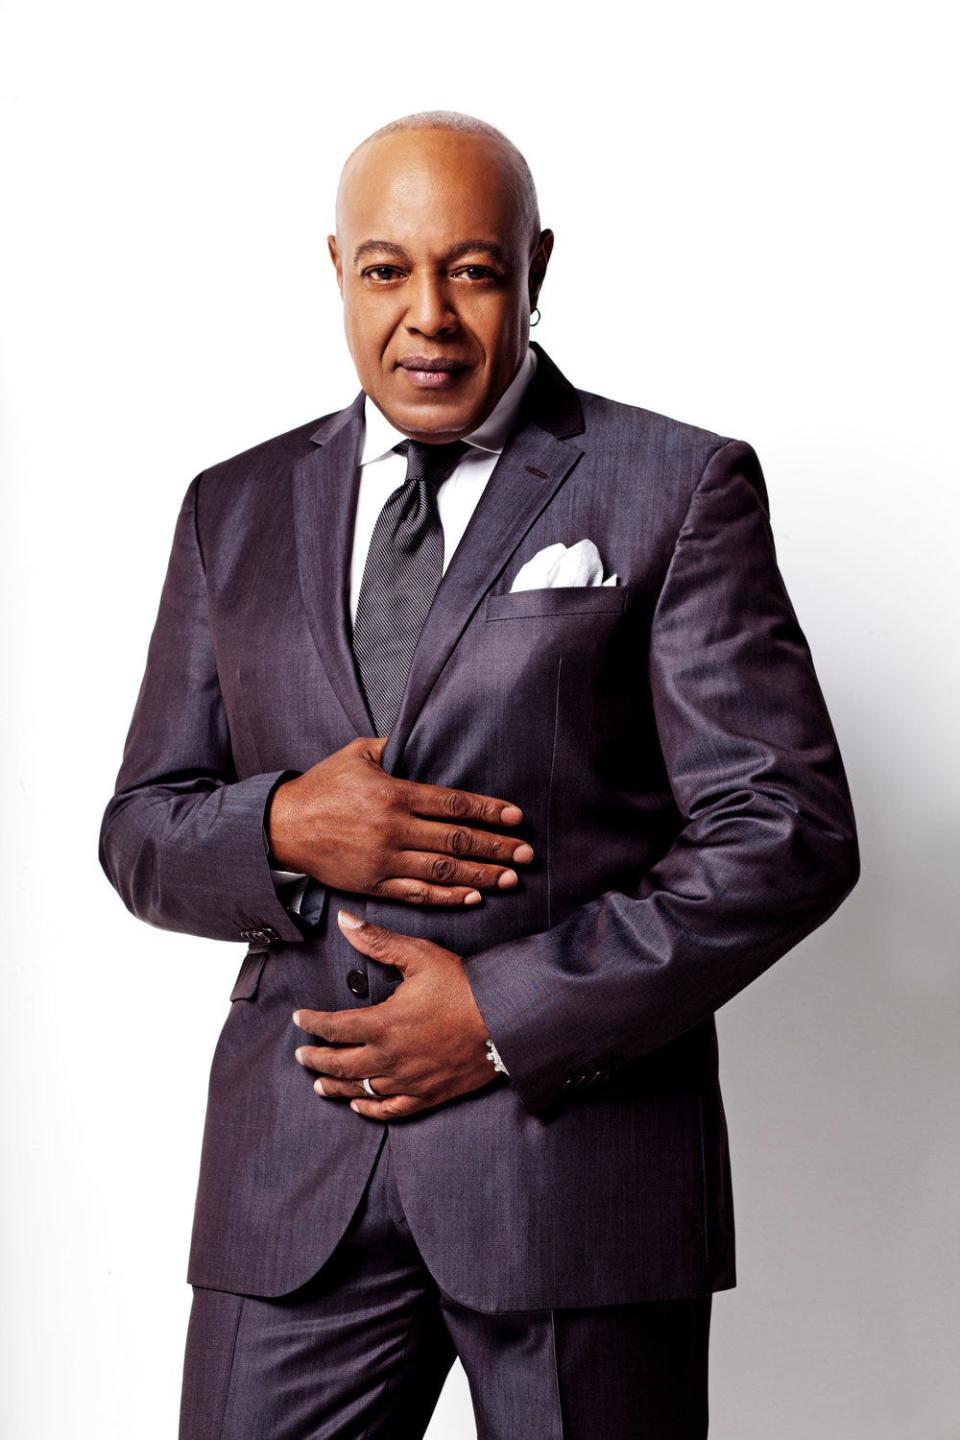 Smooth soul balladeer Peabo Bryson is coming home to perform at the Peace Center in Greenville.